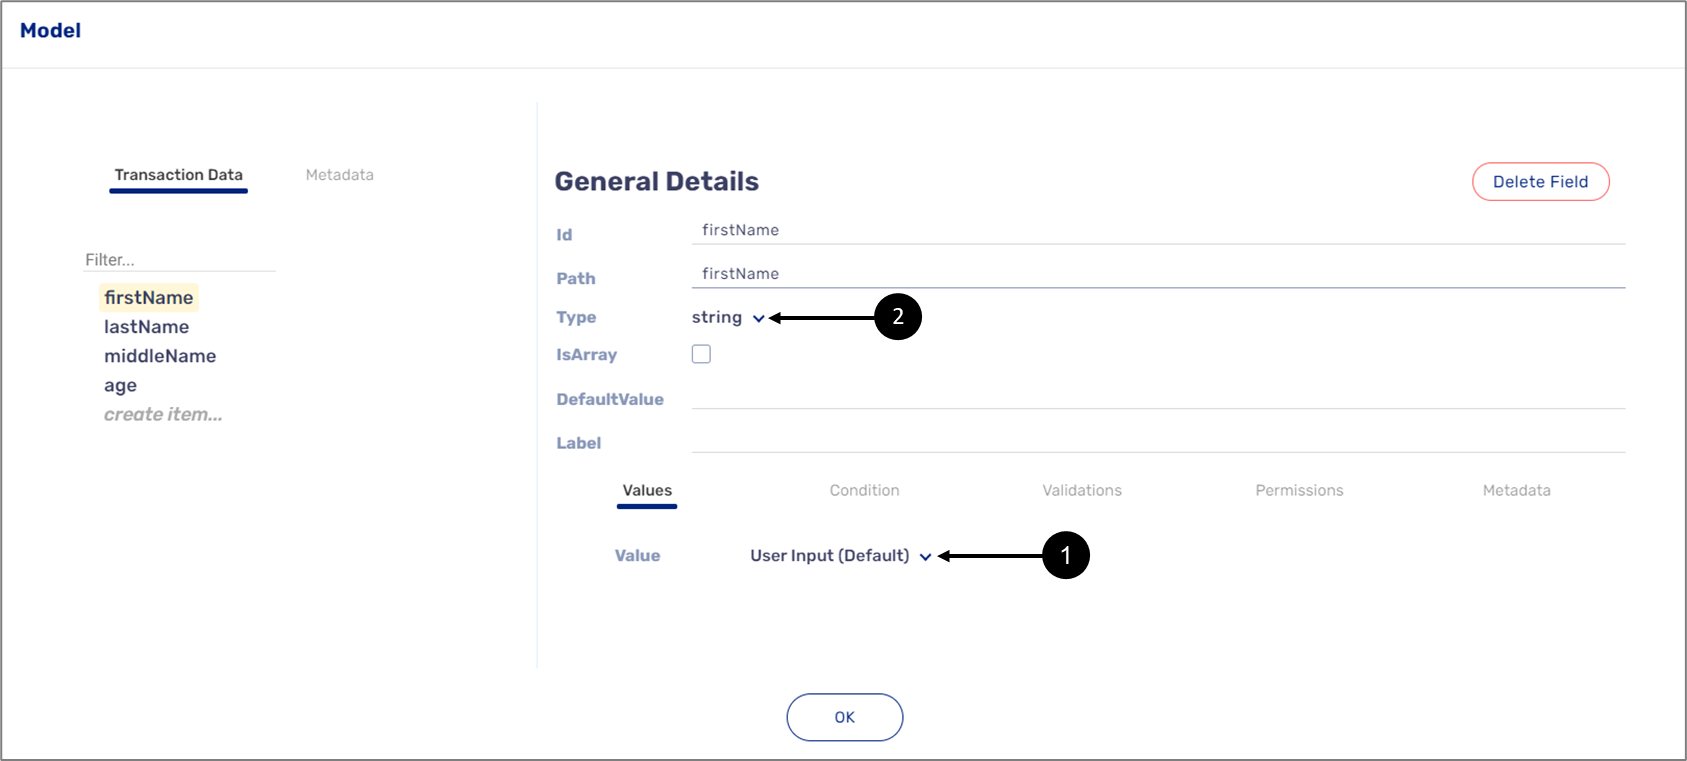 After adding components to the canvas and connecting them to the Model with transaction data items the Value is automatically set to the User Input (Default) value meaning that the end-user will input information manually. The type of input will be determined by the Type selection.